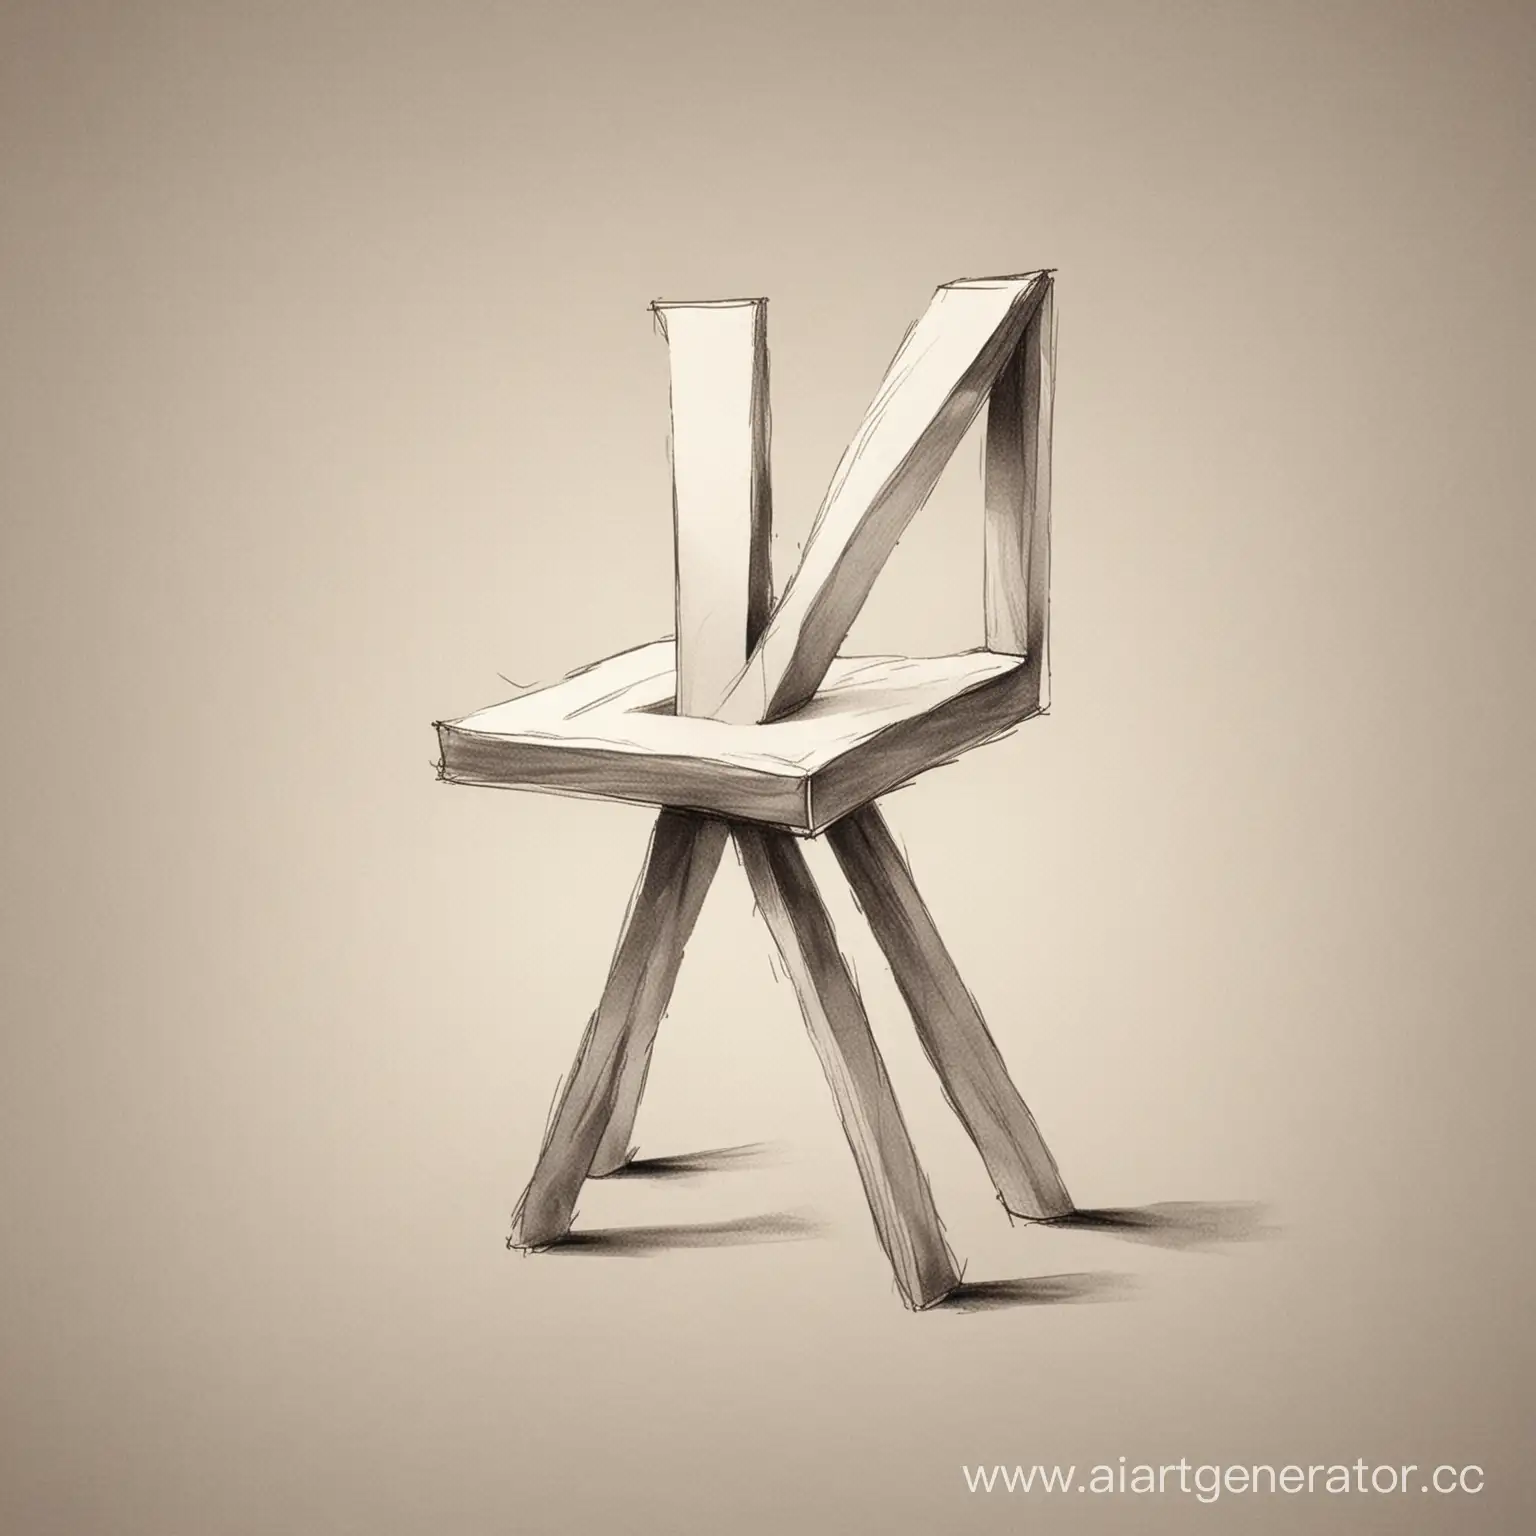 Minimalist-Sketch-of-a-Letter-K-Chair